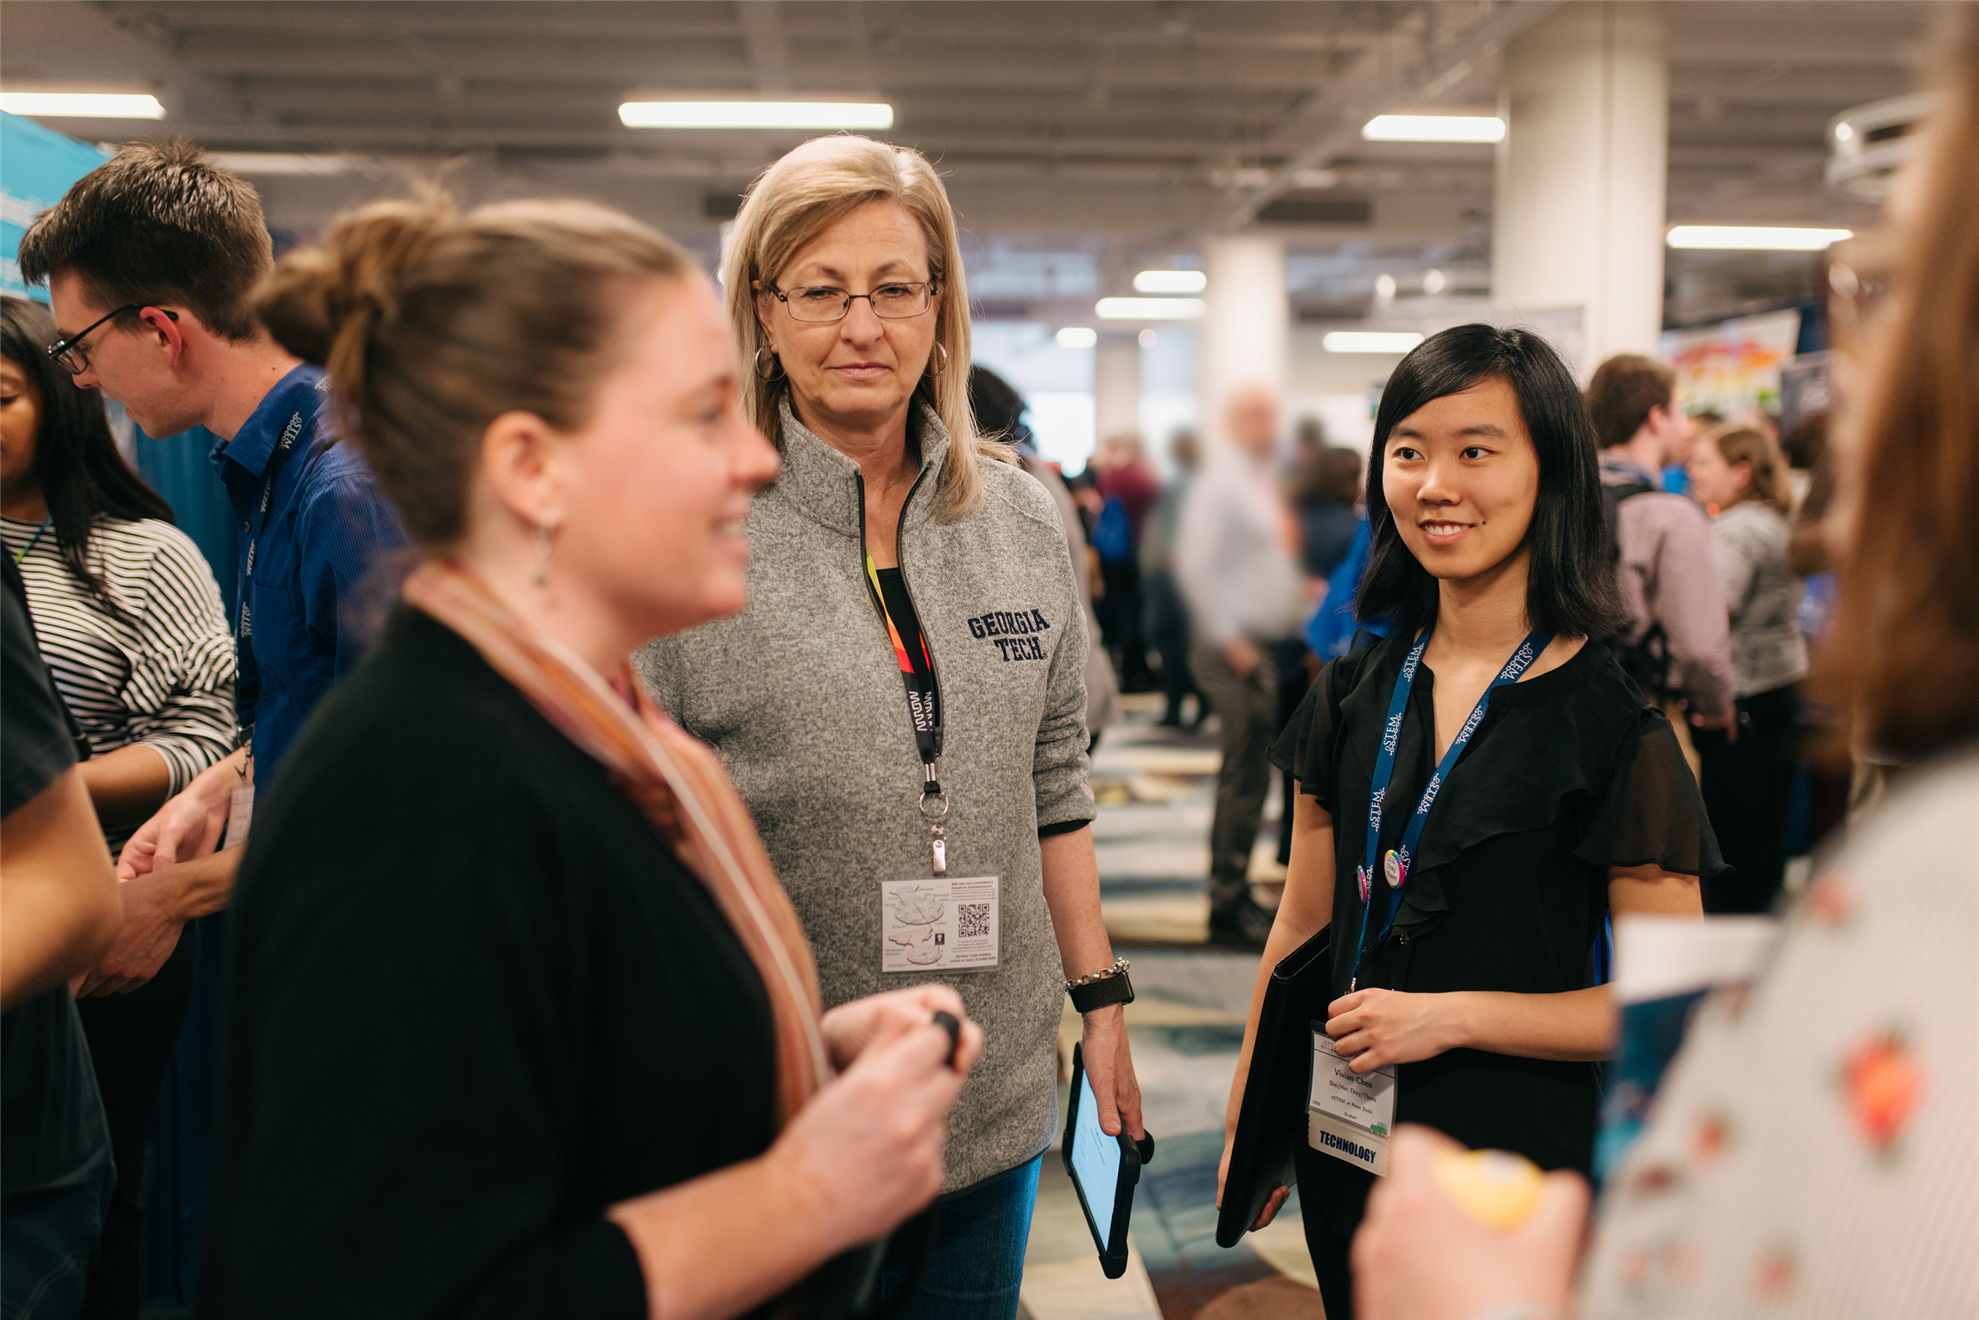 From Conference 2019, Image of people smiling in a conference area and talking